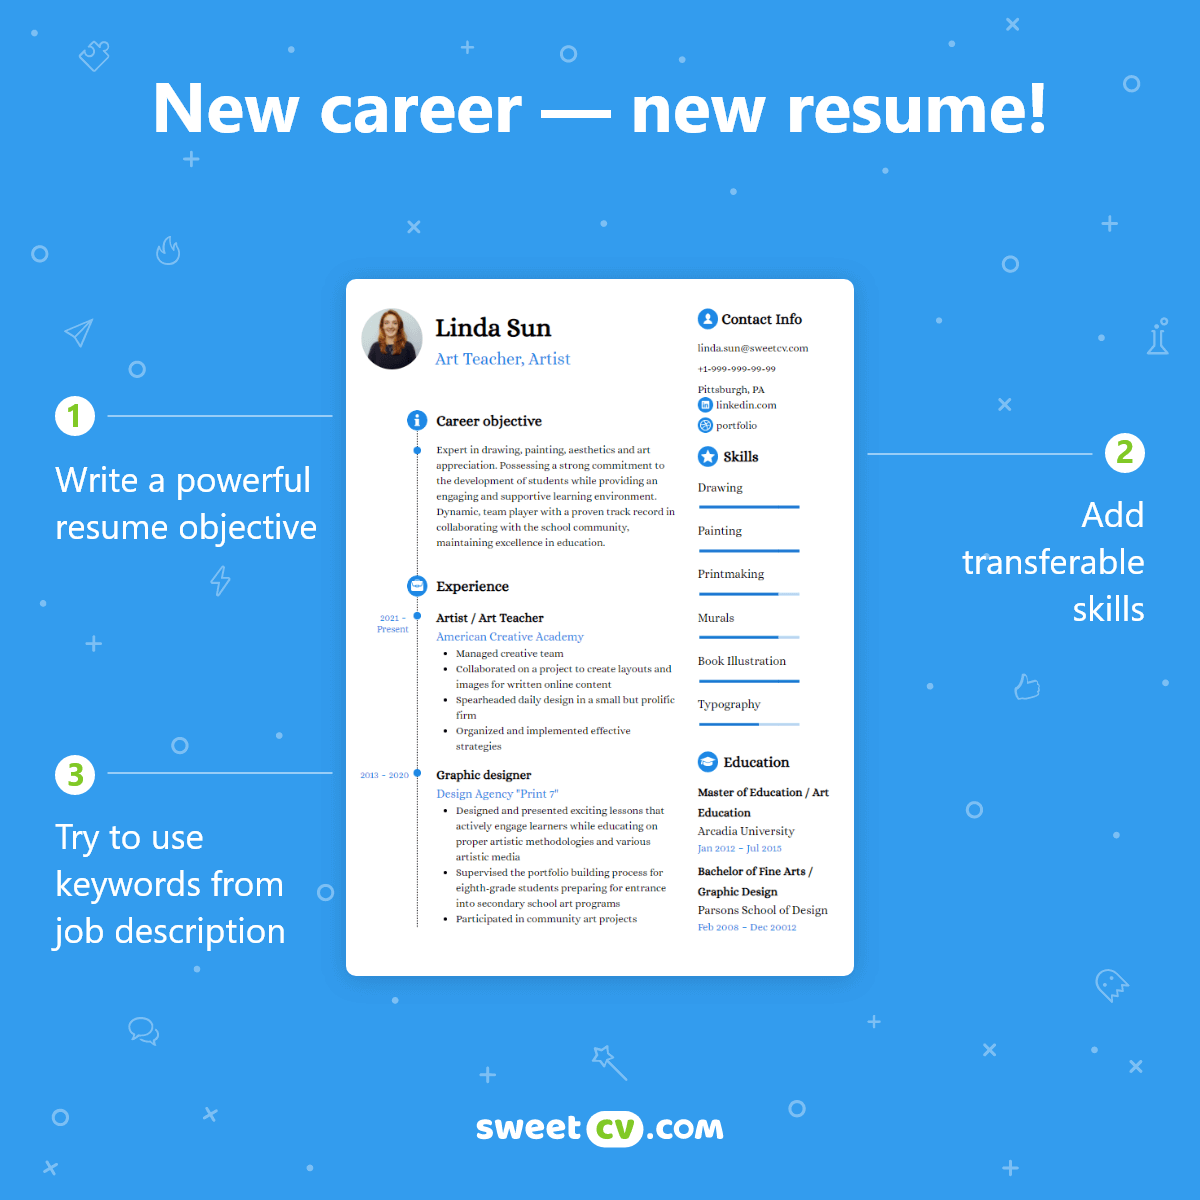 Tips for resume when changing careers